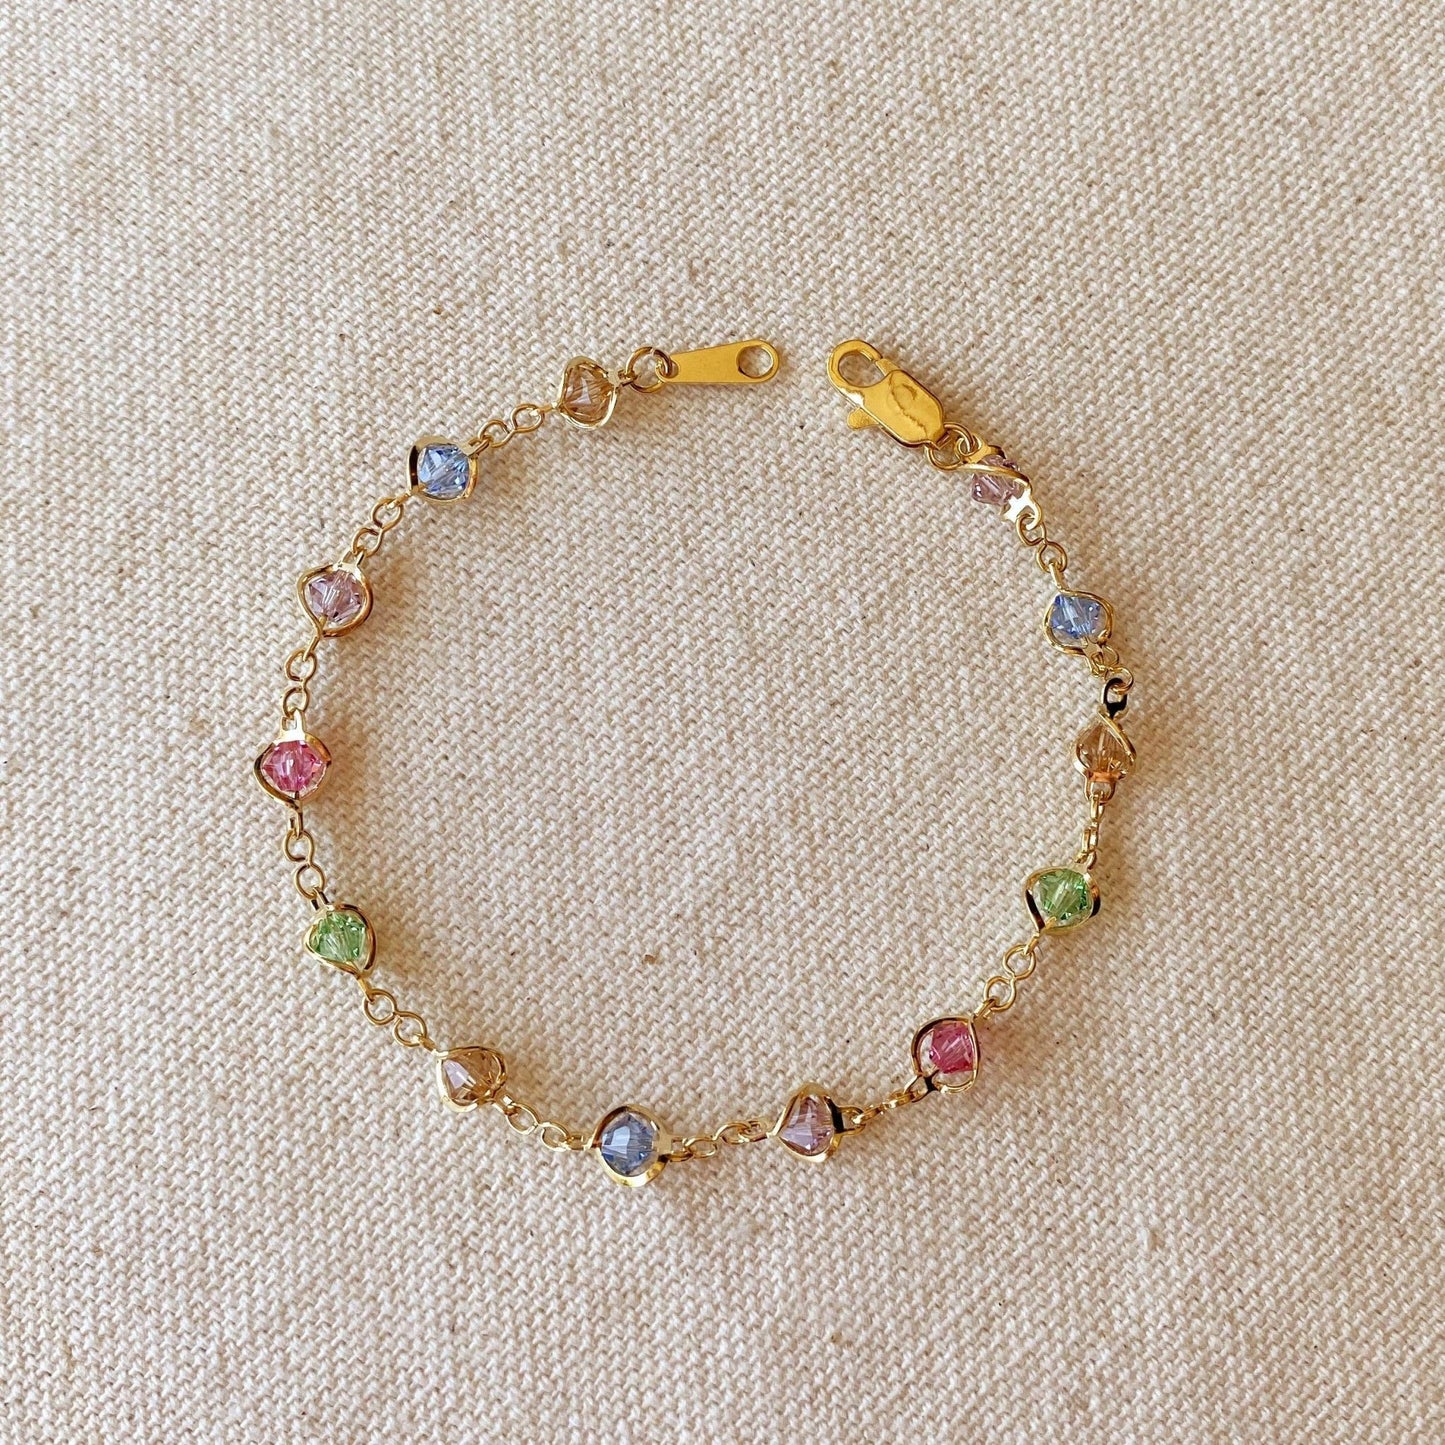 18k Gold Filled Bracelet with Colorful Crystal Beads - FOREVERLINKX